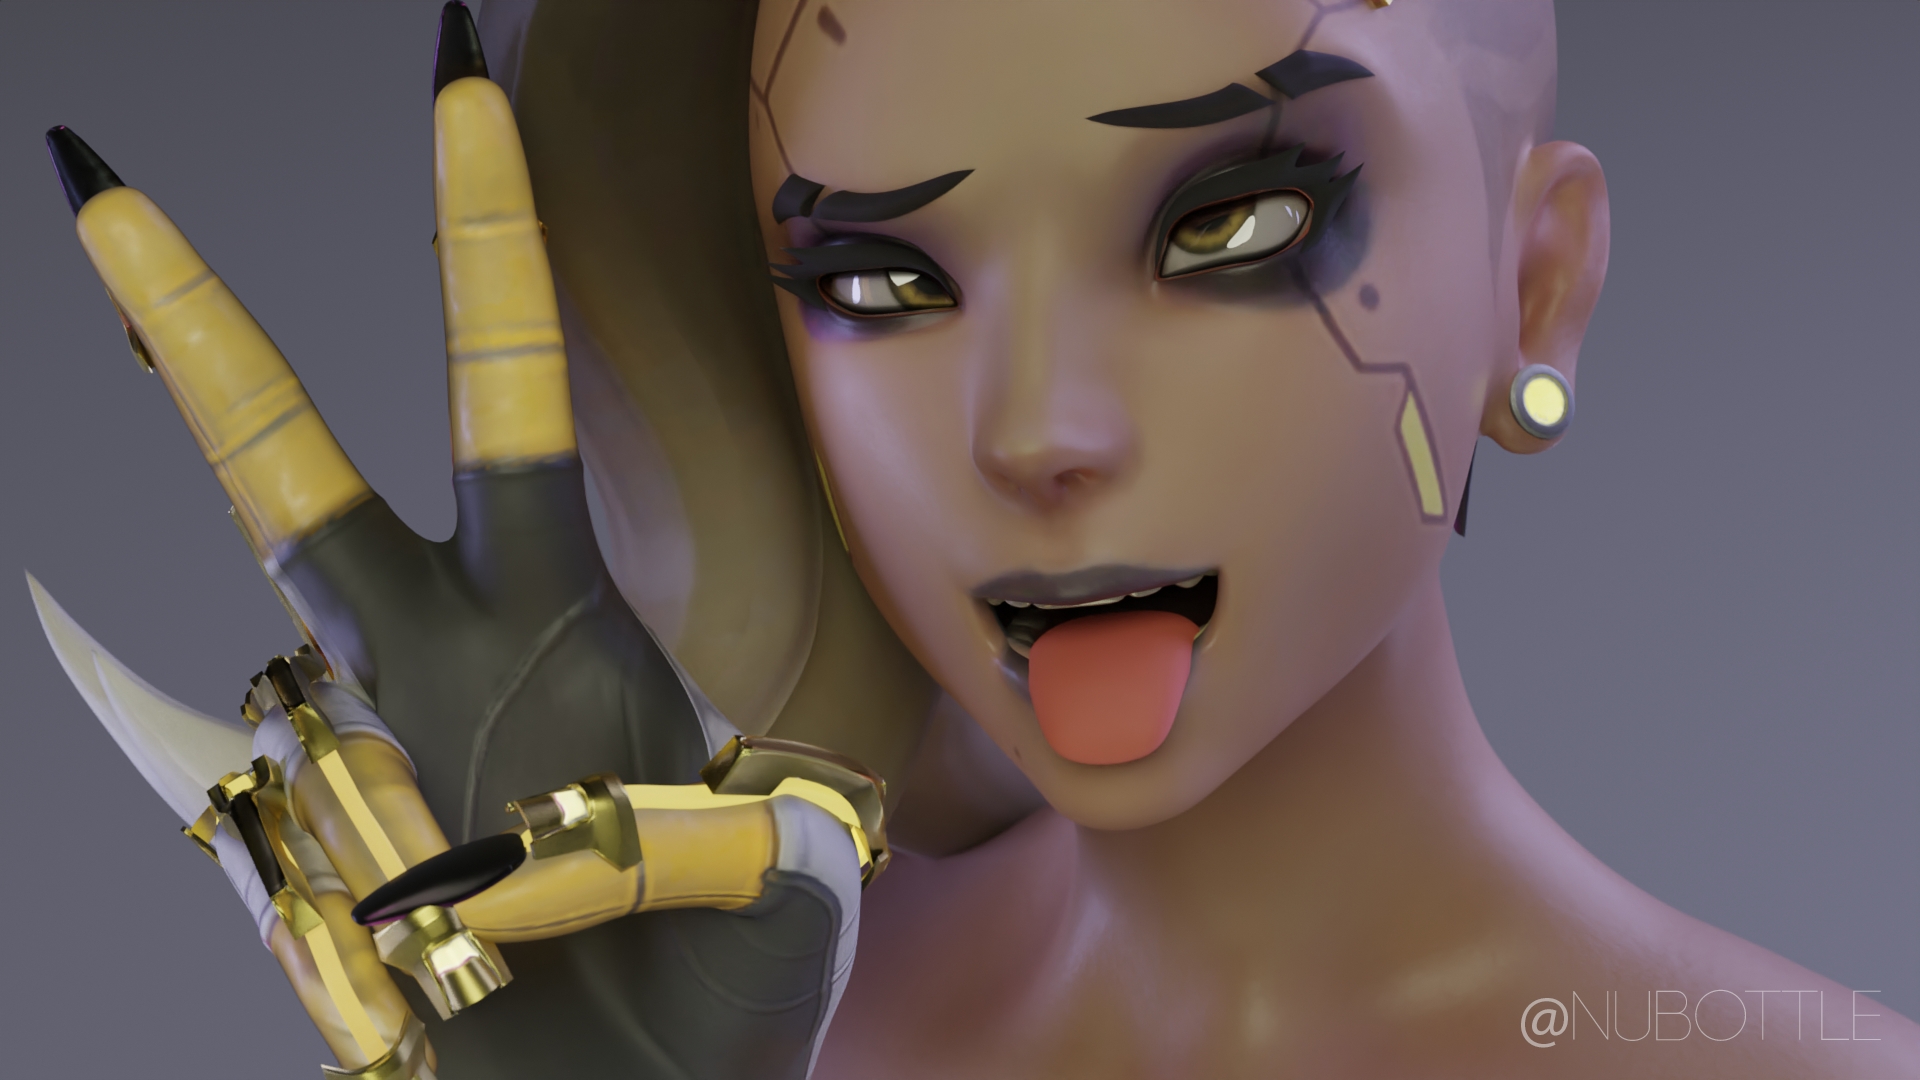 Sombra Tits Naked Overwatch Sombra Overwatch Naked Big Tits Nipples Hot Sexy Solo 2